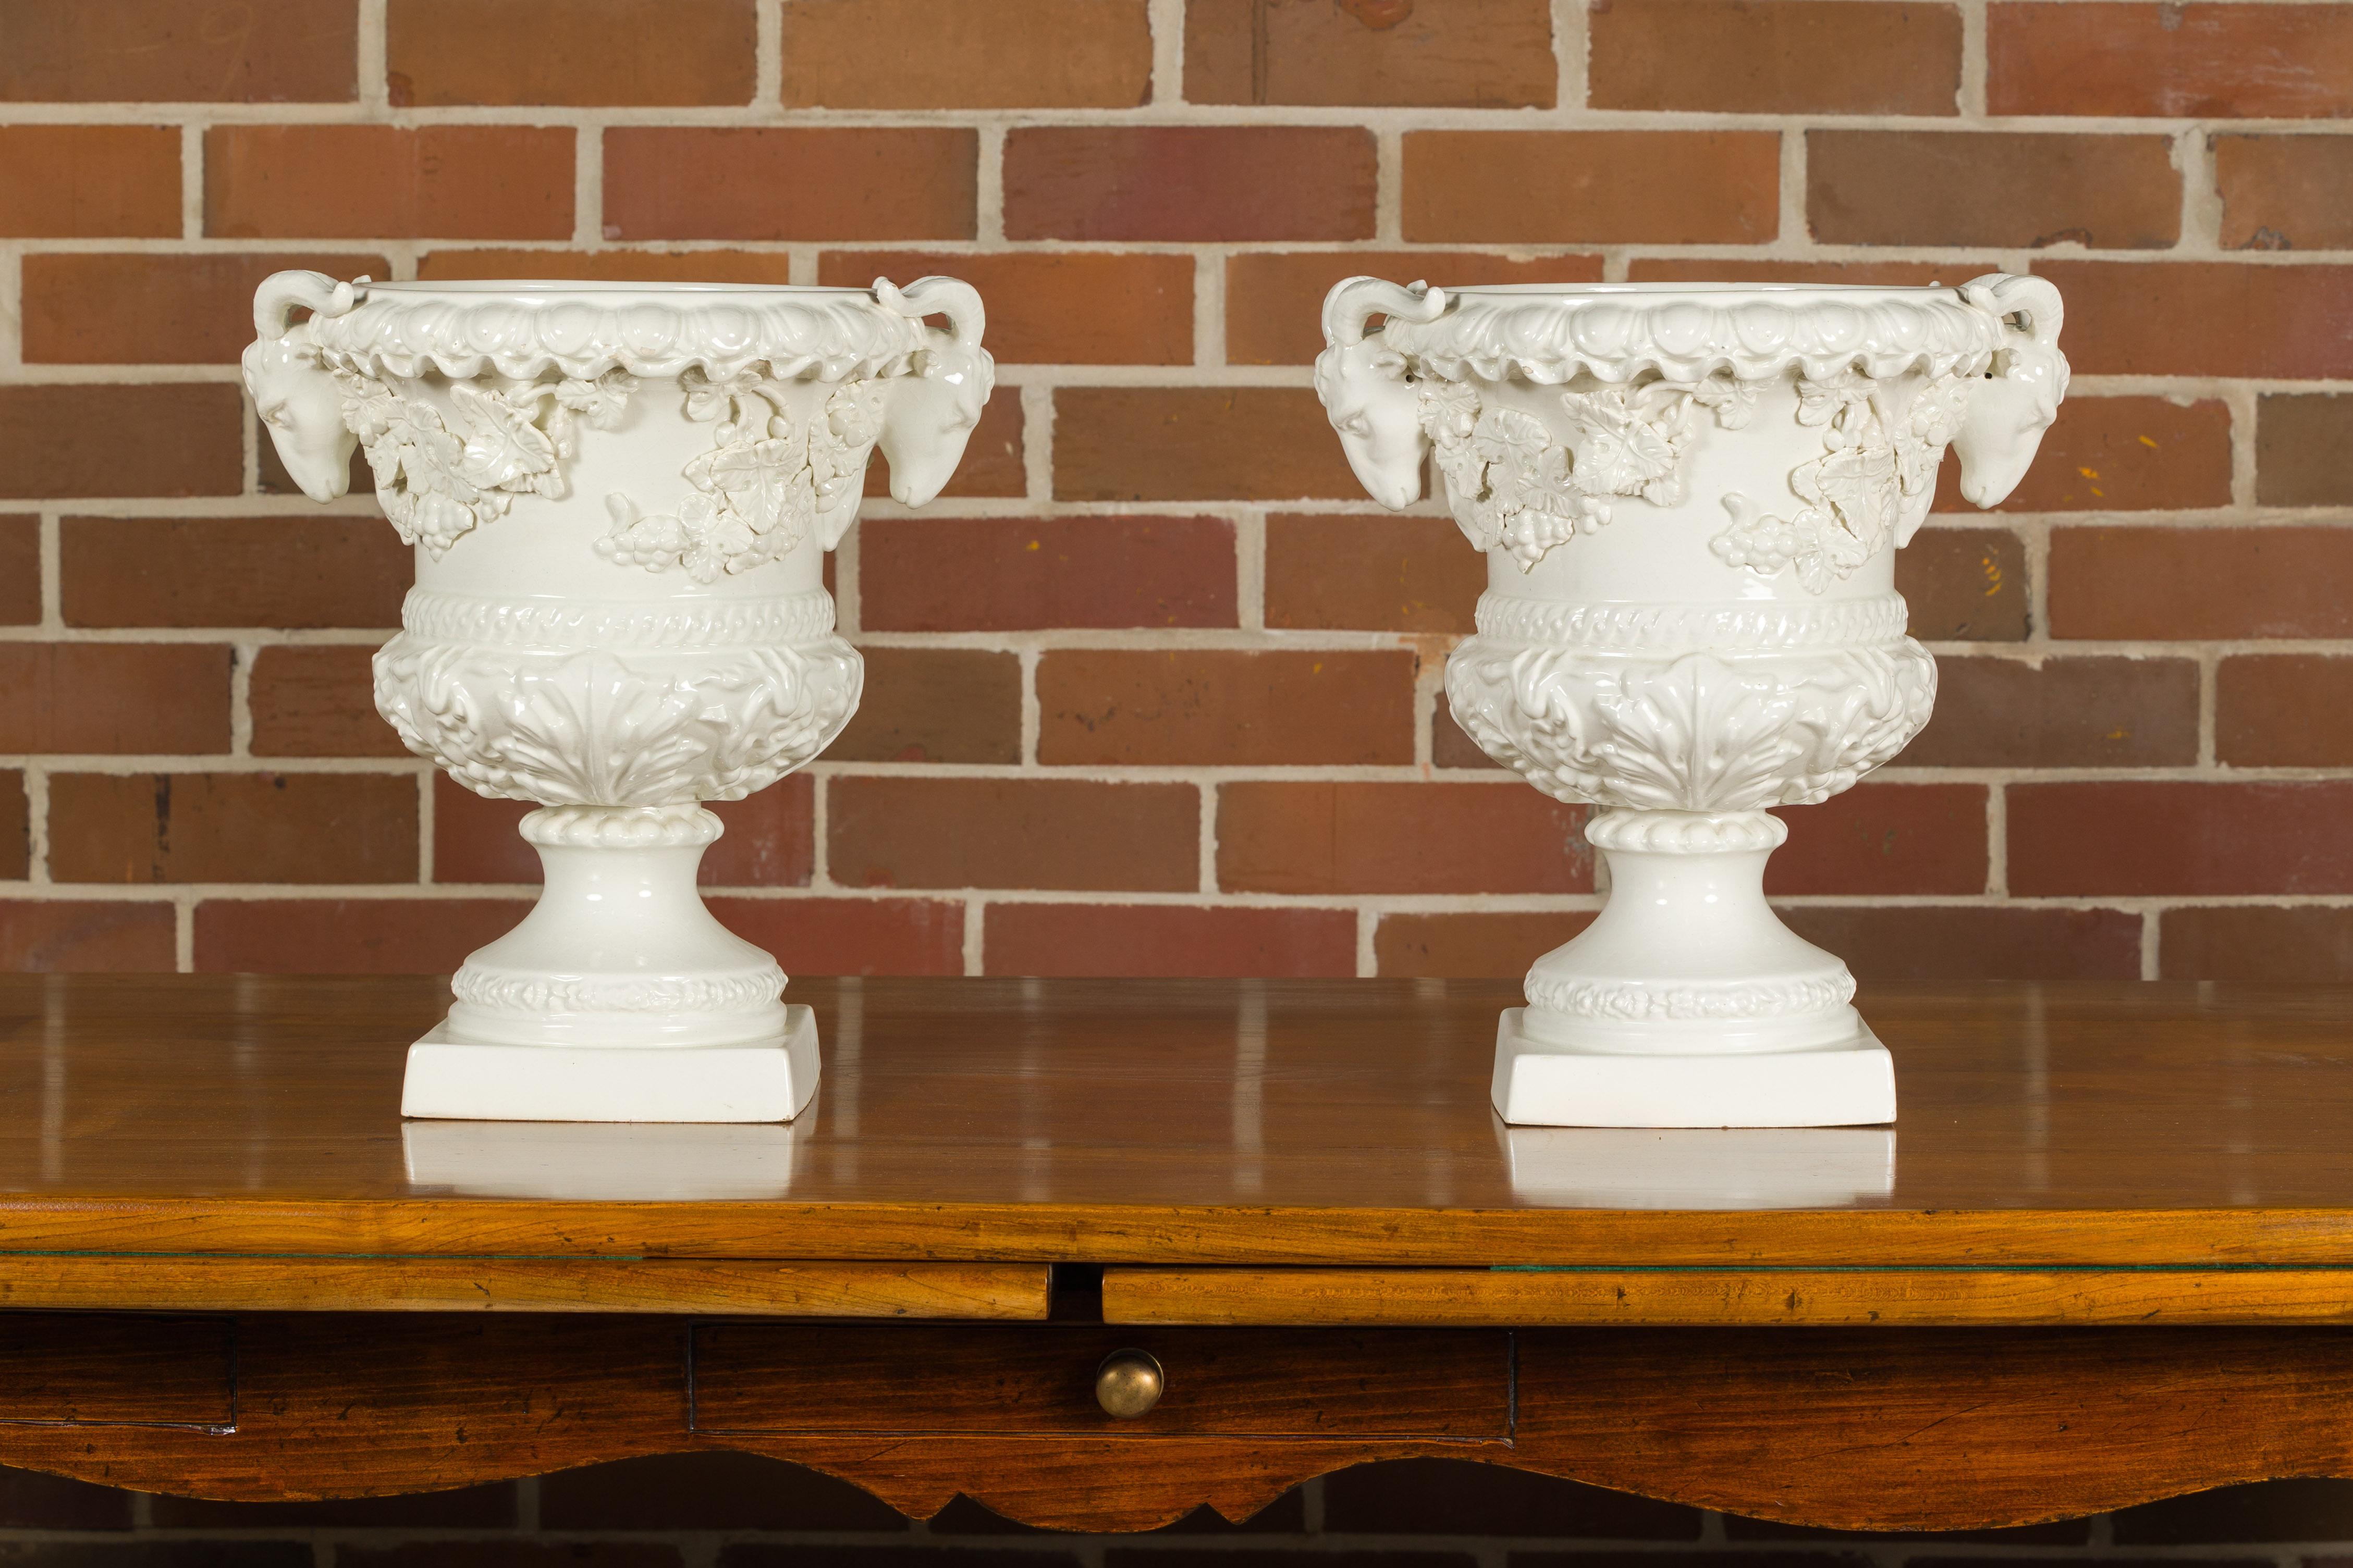 A pair of Blanc de Chine urns from the Midcentury period, with rams heads handles, grapes and ivy motifs. This pair of Blanc de Chine urns, originating from the Midcentury period, encapsulates a blend of classical elegance and intricate design. Each